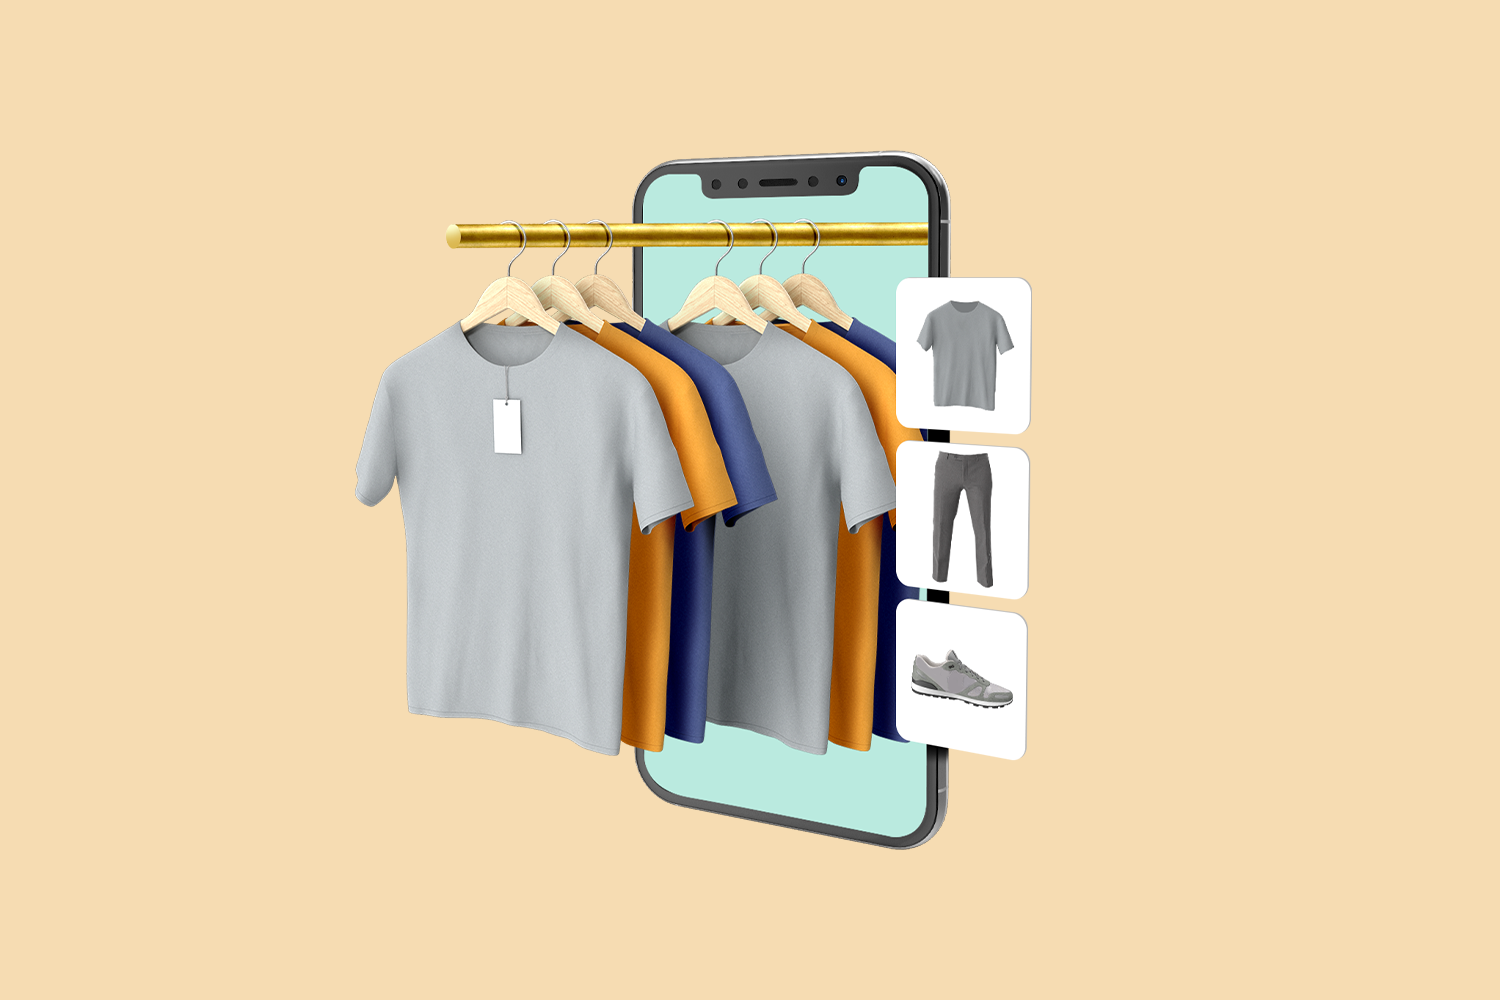 A retail t-shirt rack coming out of a smartphone